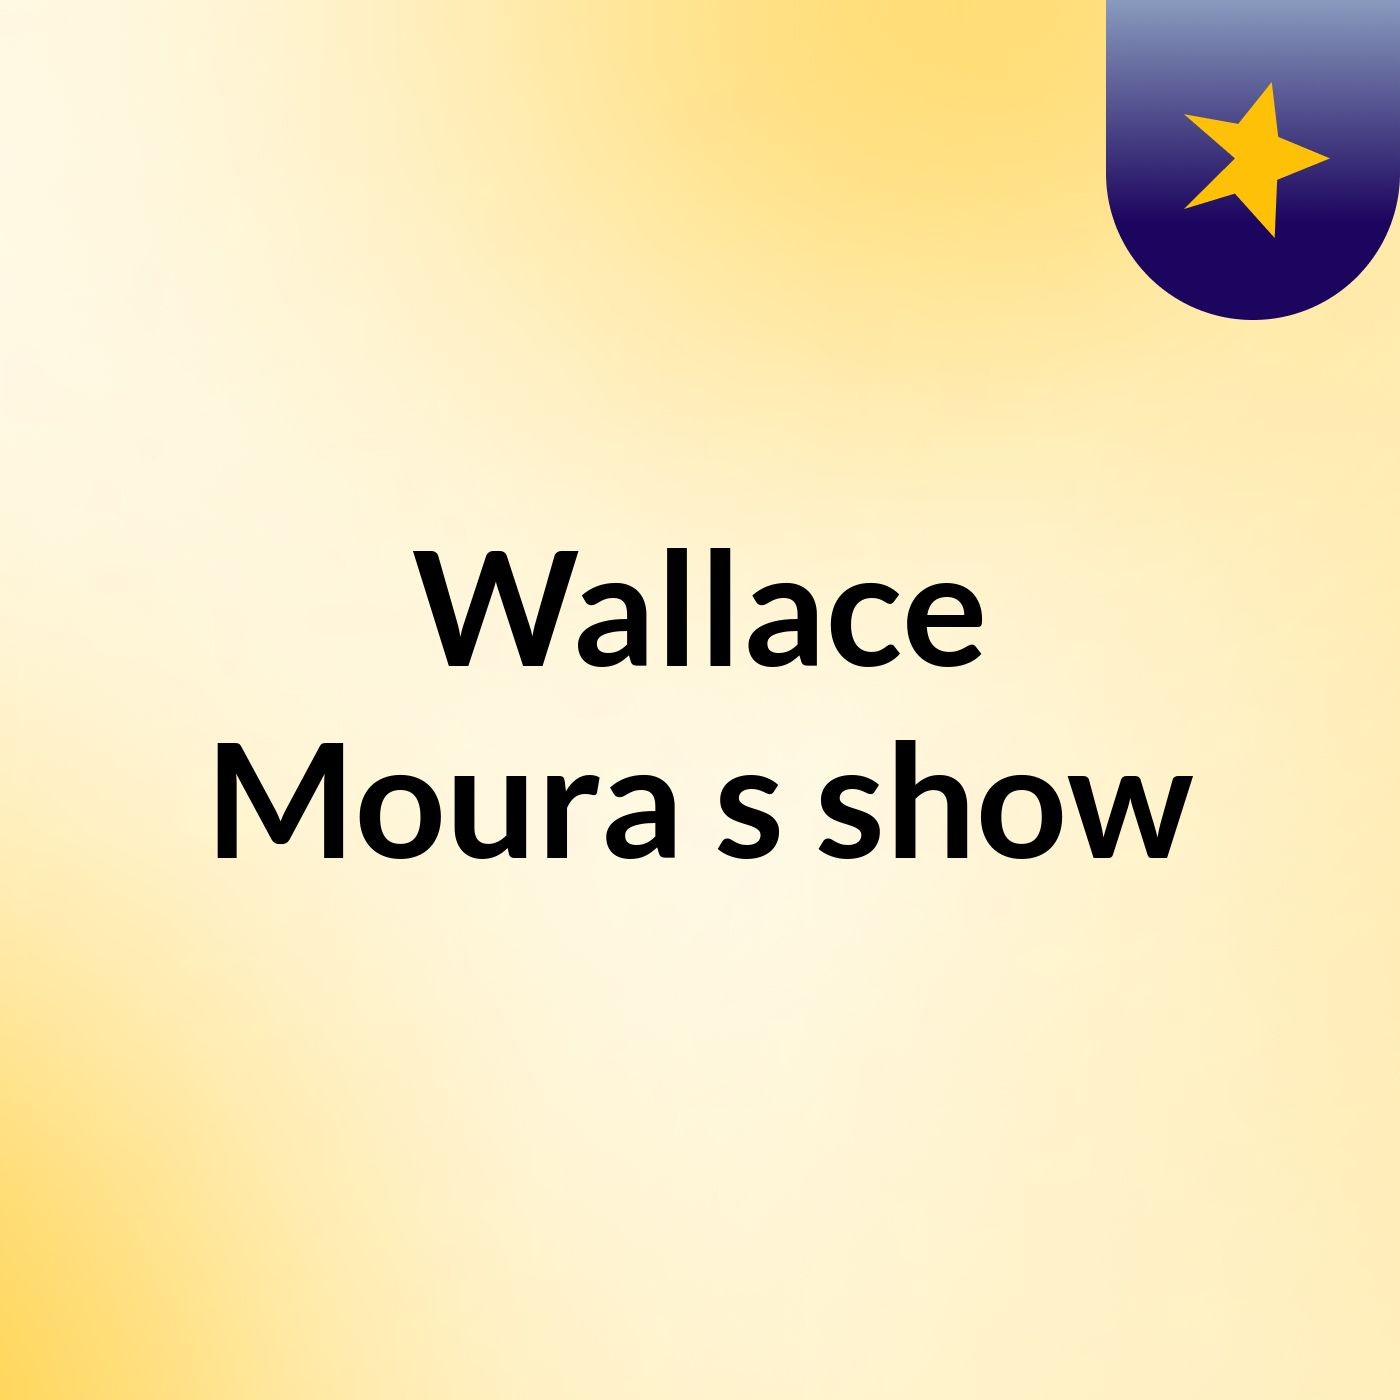 Wallace Moura's show